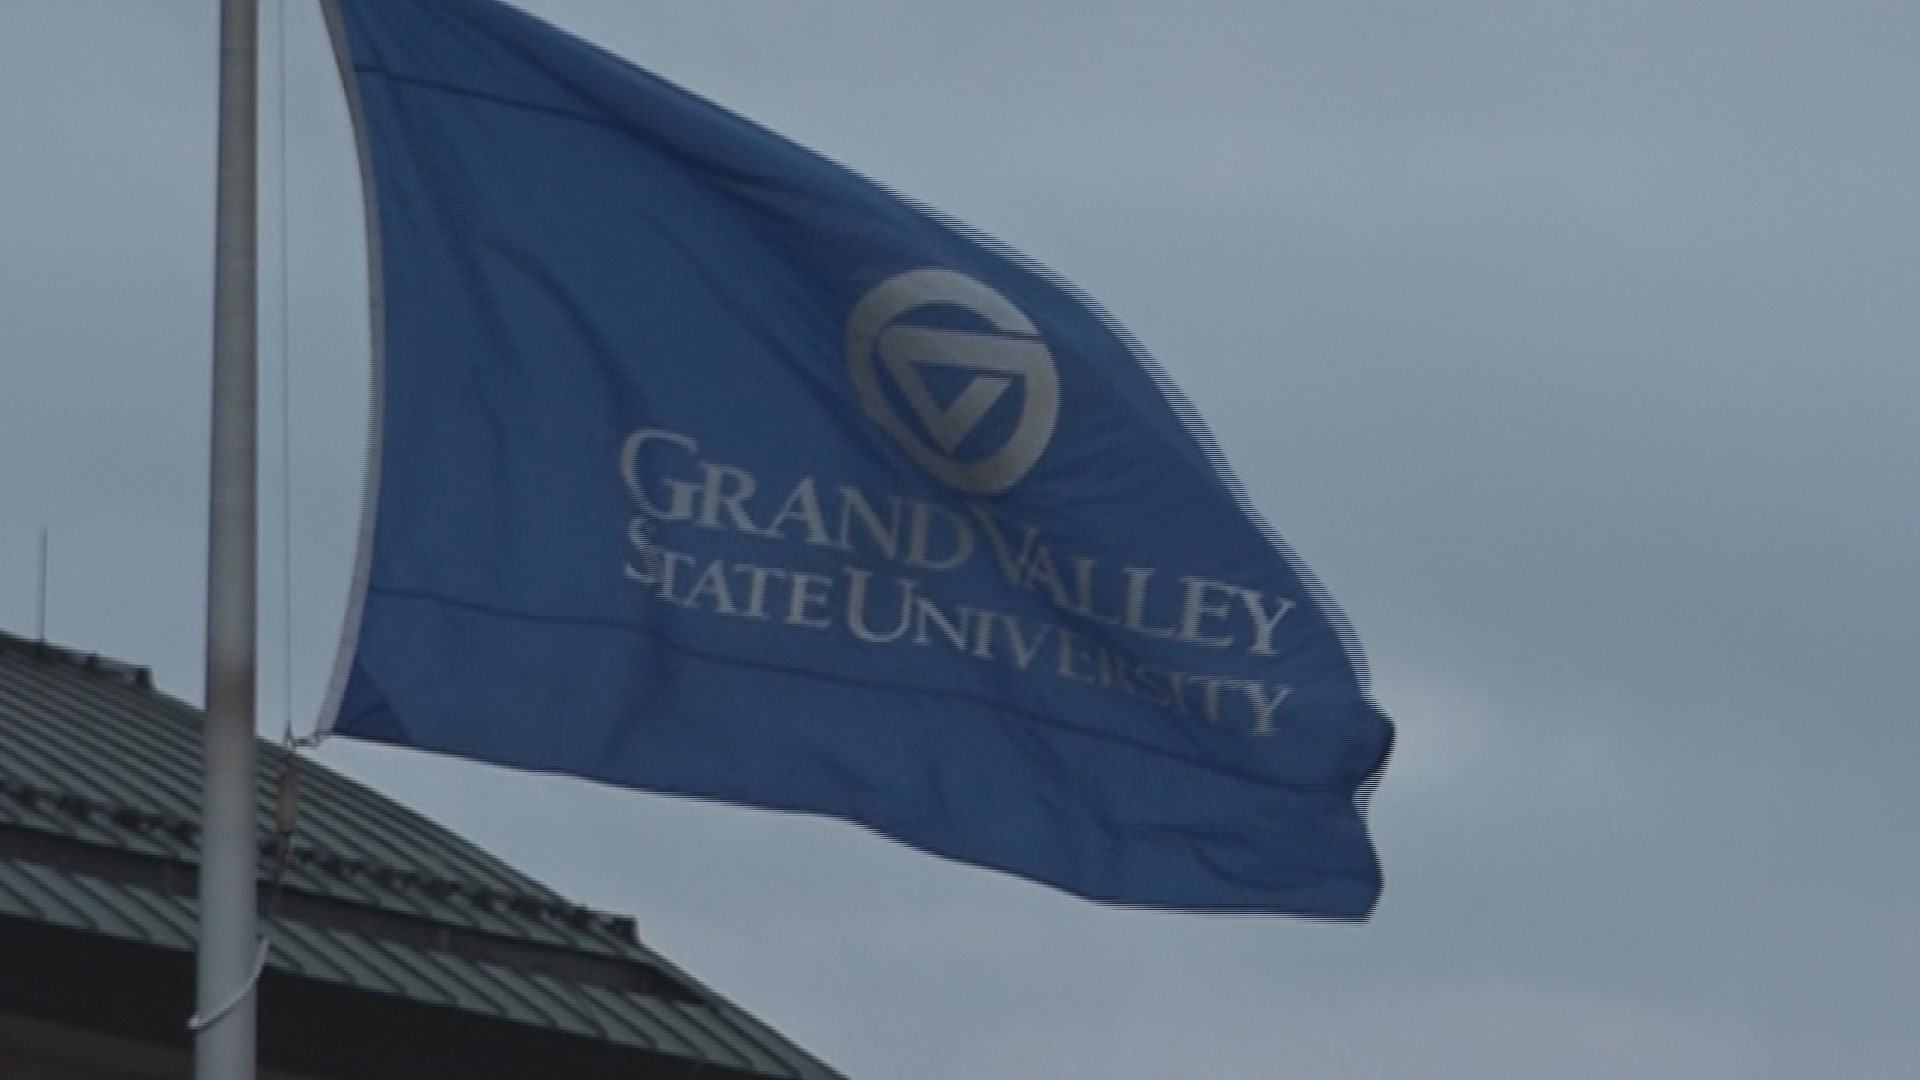 Grand Valley State University announced that some students may have had their personal data compromised after a third-party vendor experienced a data breach.